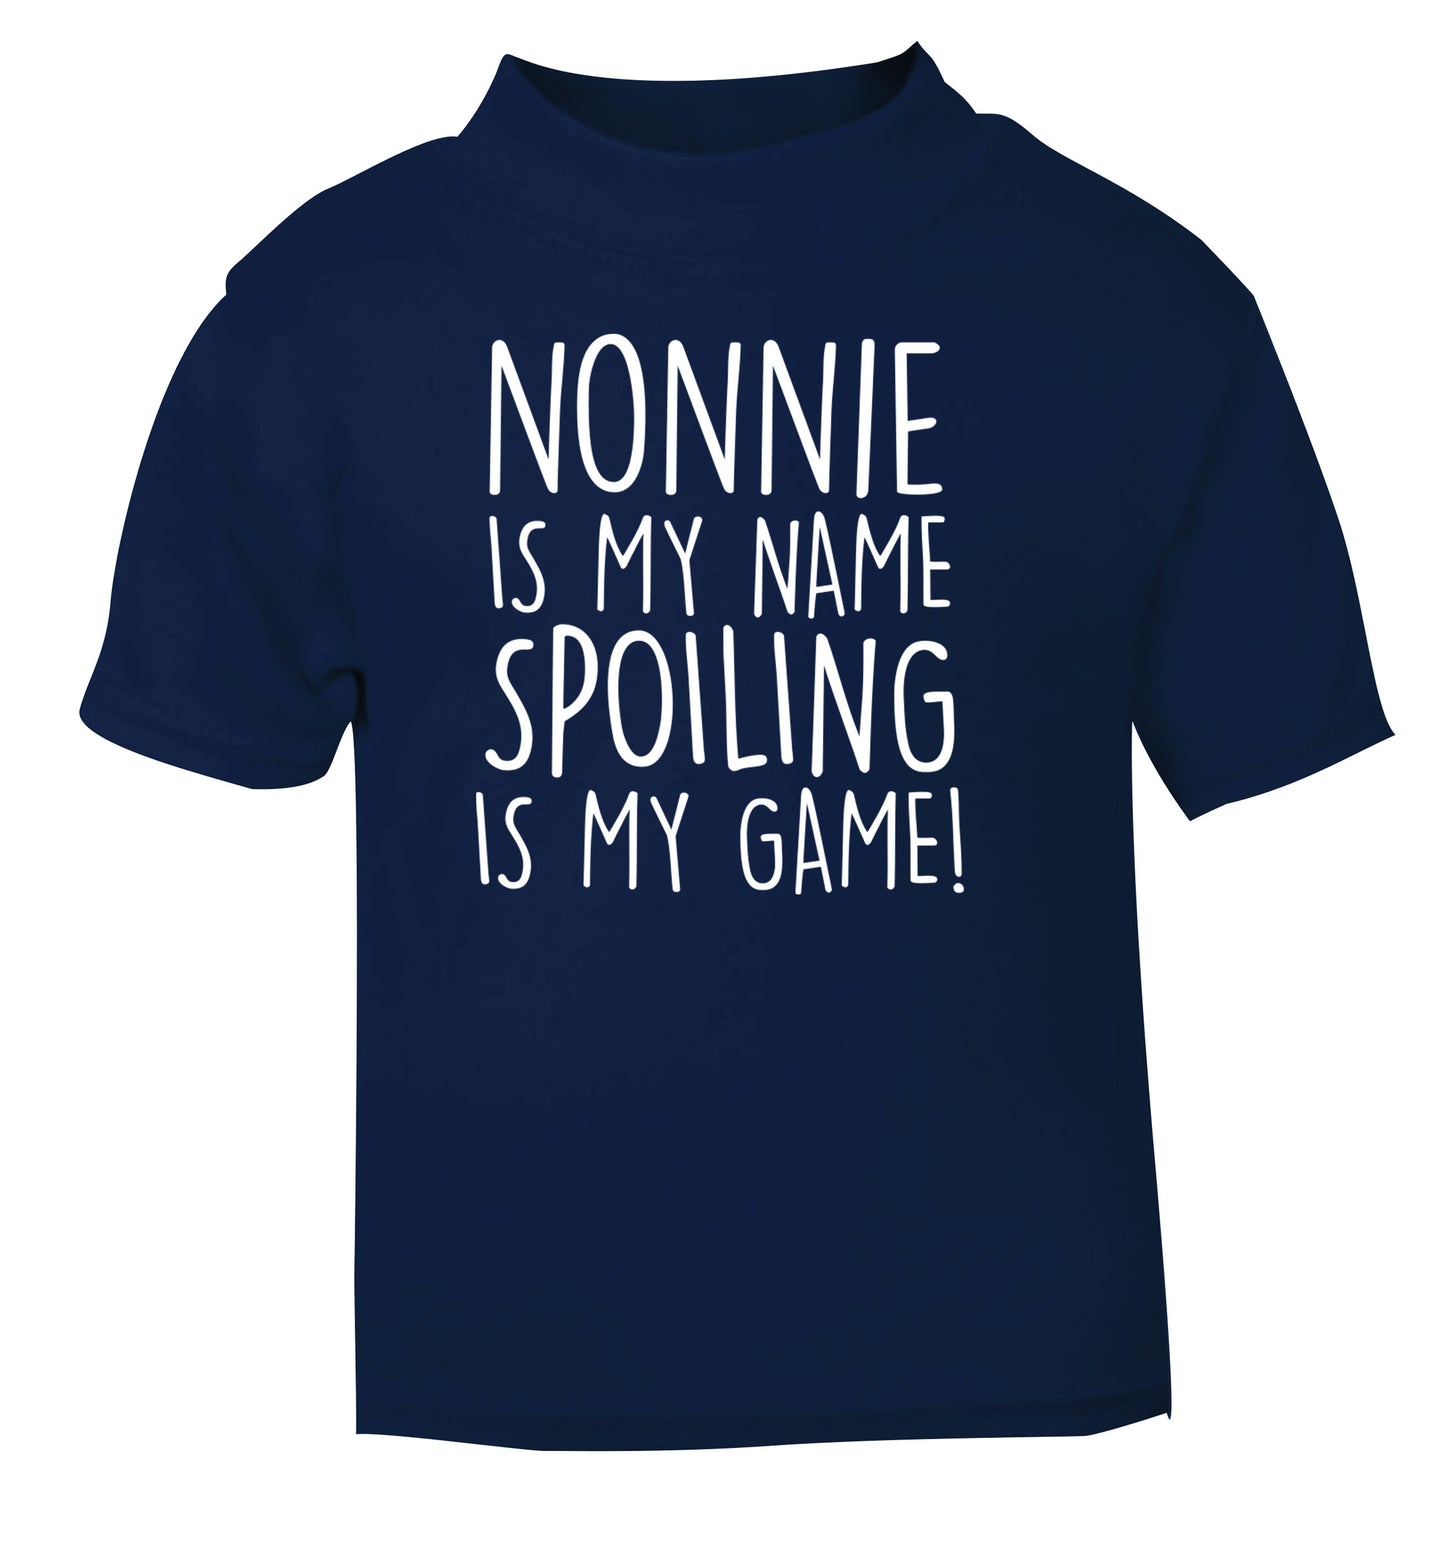 Nonnie is my name, spoiling is my game navy Baby Toddler Tshirt 2 Years